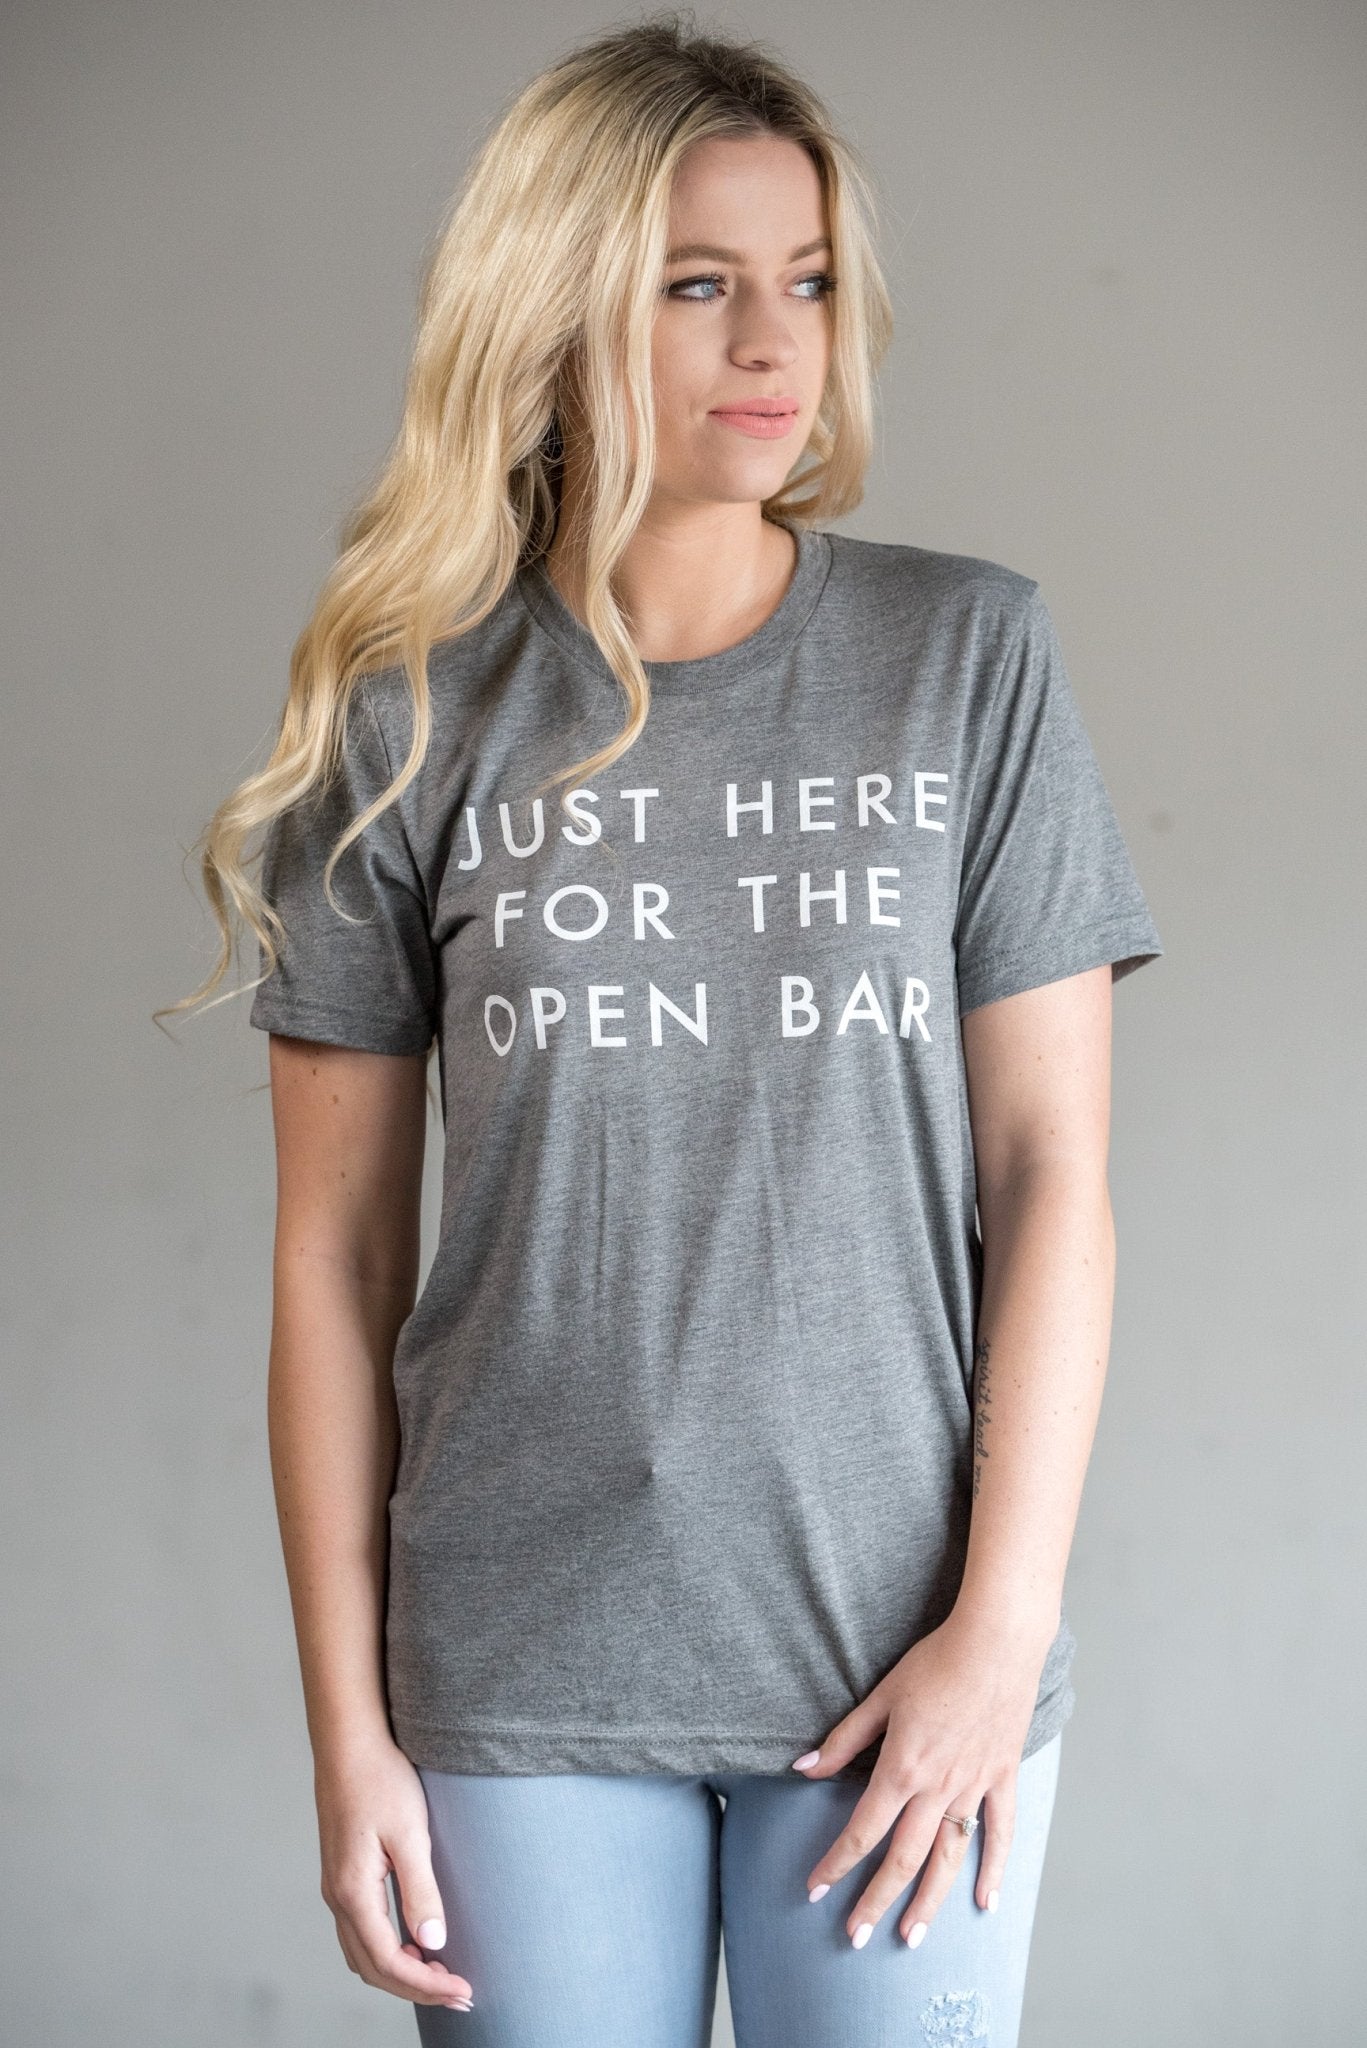 Just here for the open bar unisex short sleeve crew neck t-shirt grey - Cute T-shirts - Funny T-Shirts at Lush Fashion Lounge Boutique in Oklahoma City